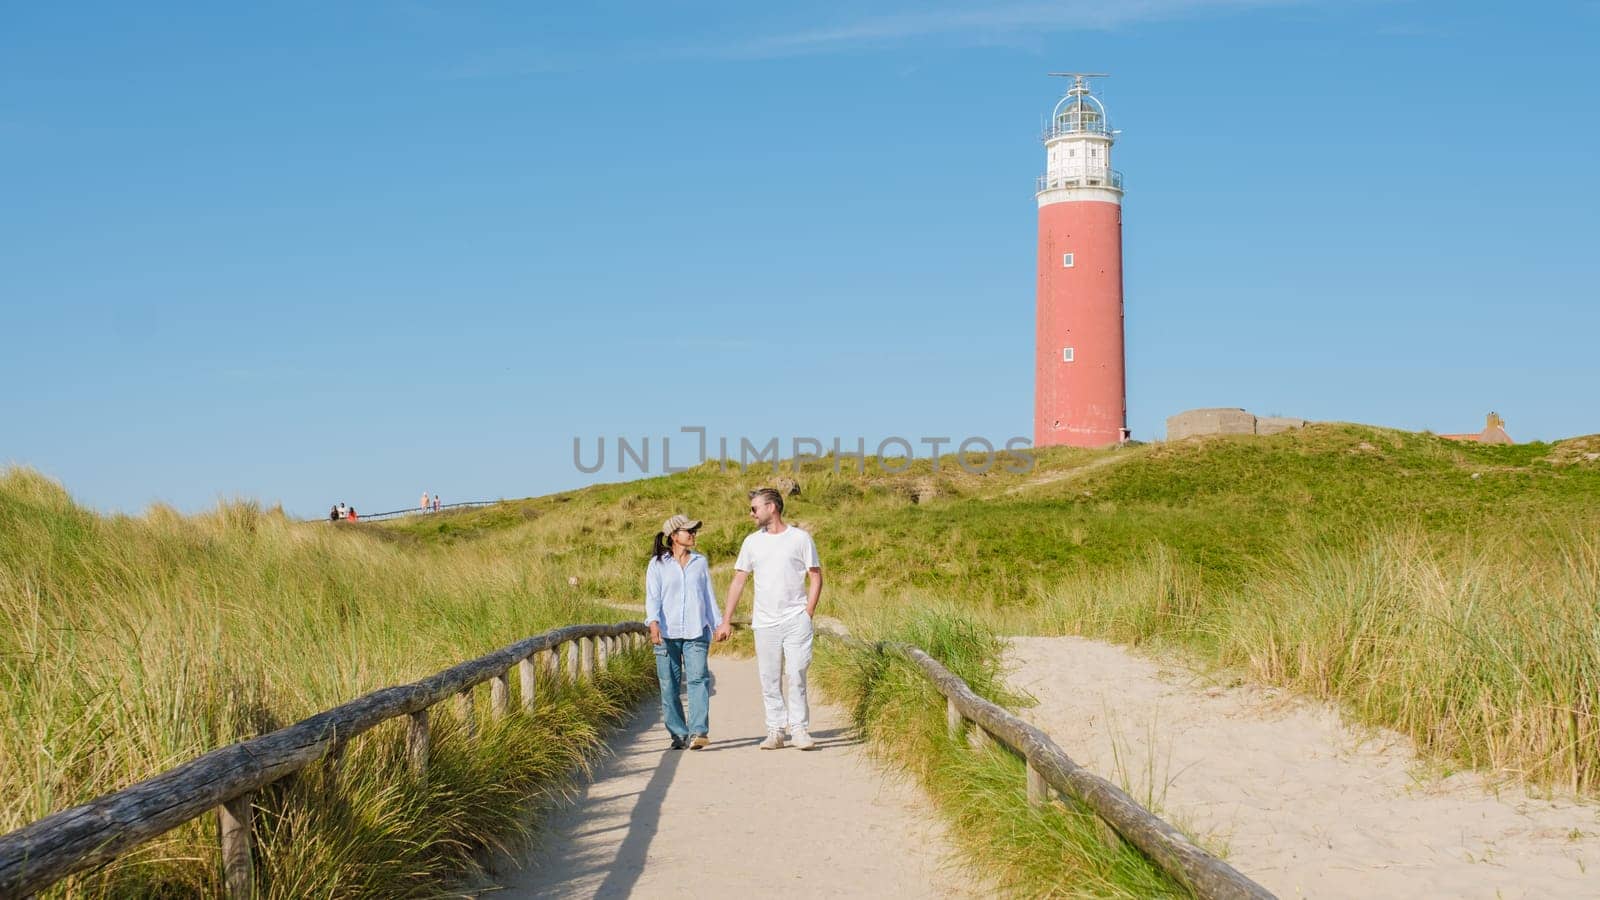 A couple leisurely walks on a path near a picturesque lighthouse in Texel, Netherlands, surrounded by scenic views of the coast. man and woman at The iconic red lighthouse of Texel Netherlands